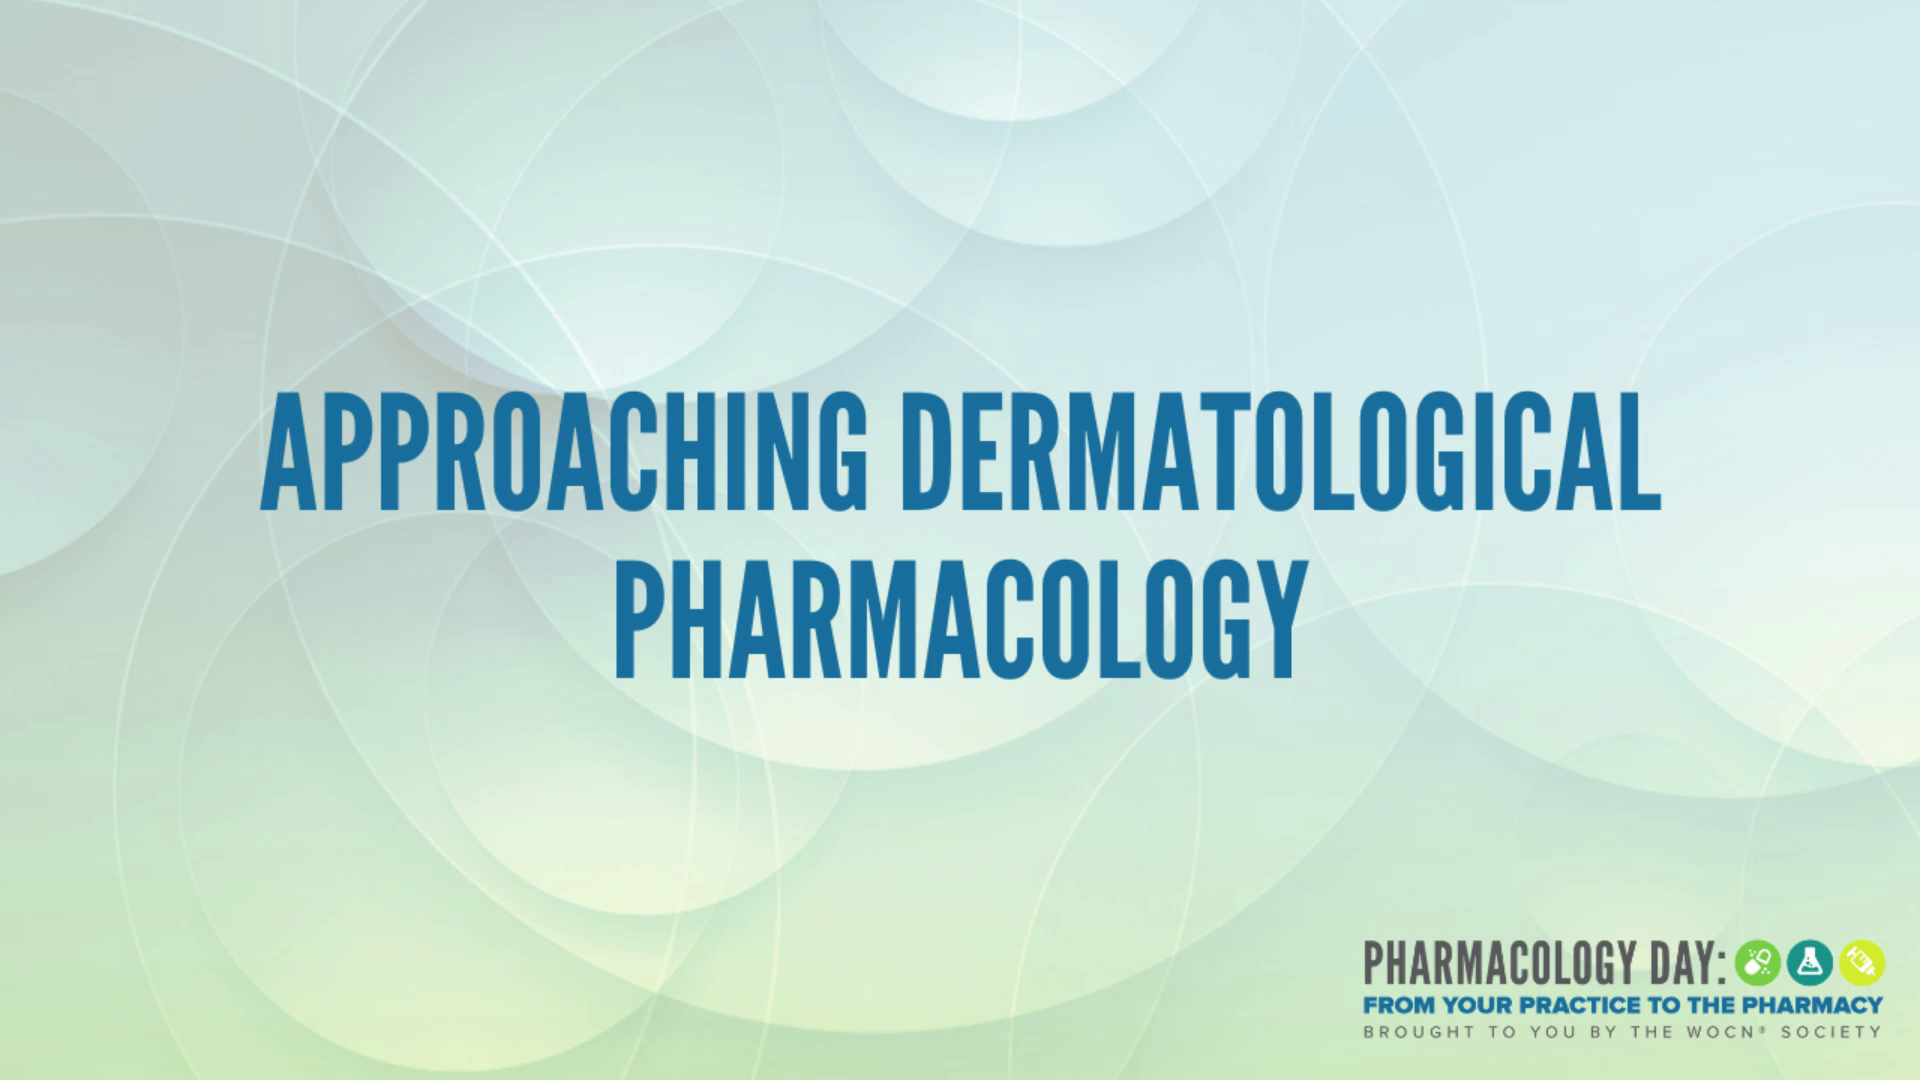 PD04 - Approaching Dermatological Pharmacology